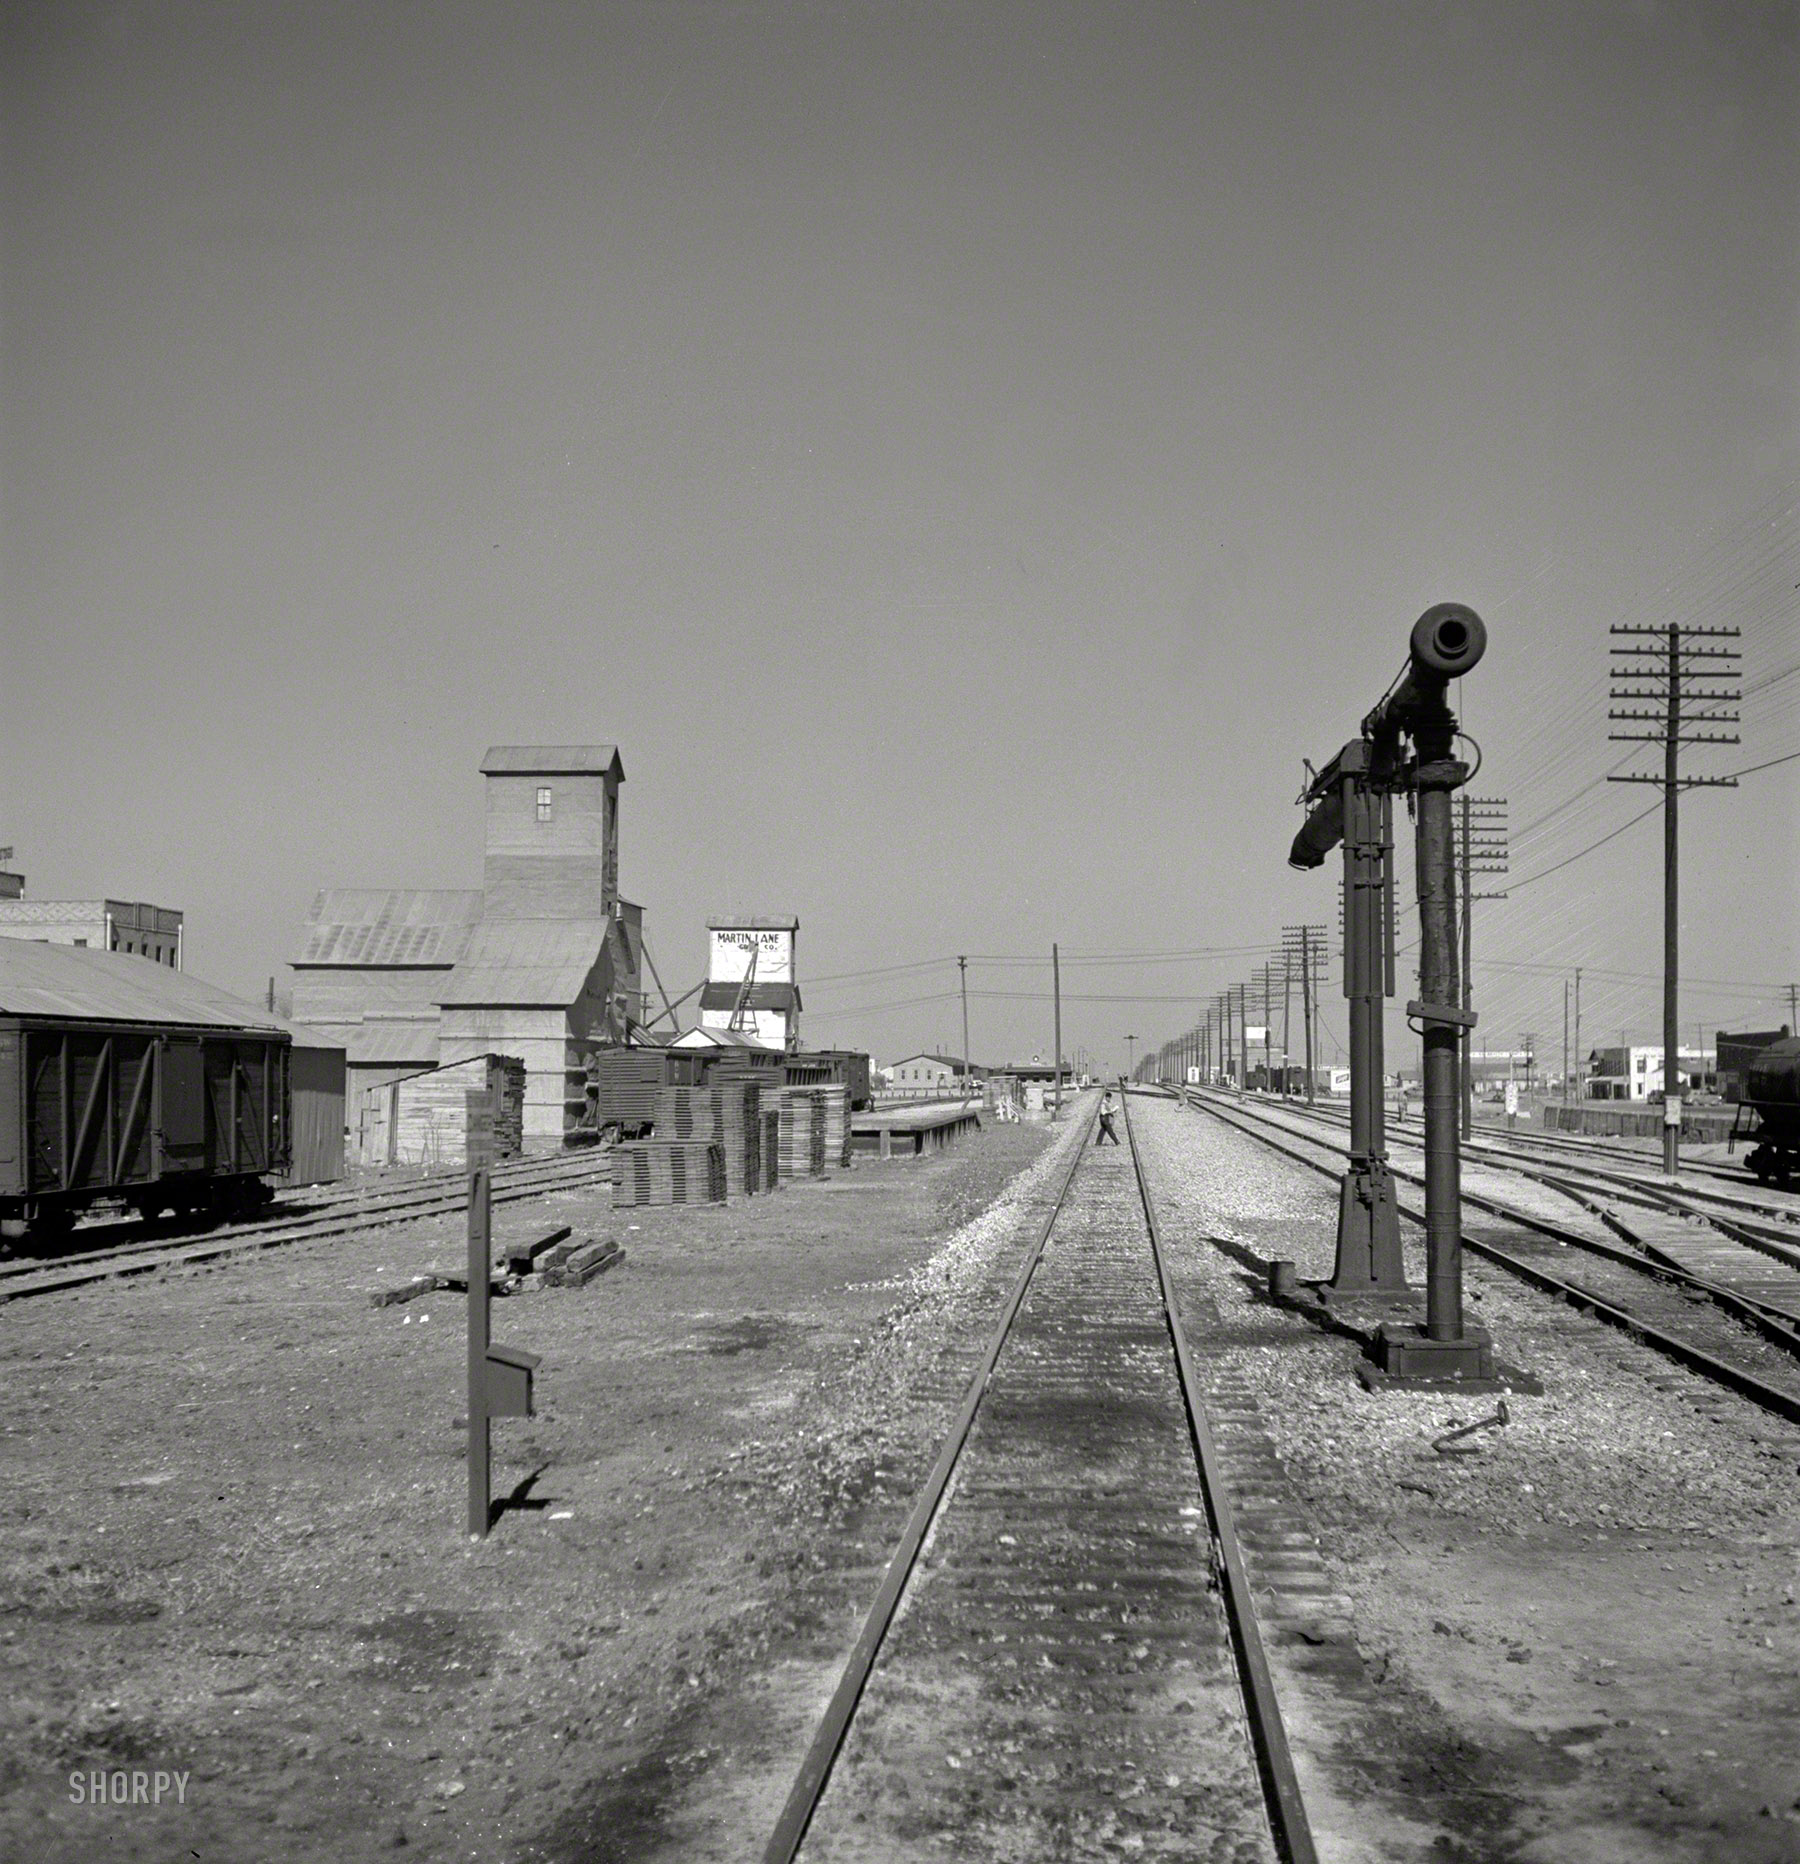 March 1943. "Pampa, Texas. Going through a town on the Atchison, Topeka & Santa Fe." Photo by Jack Delano, Office of War Information. View full size.